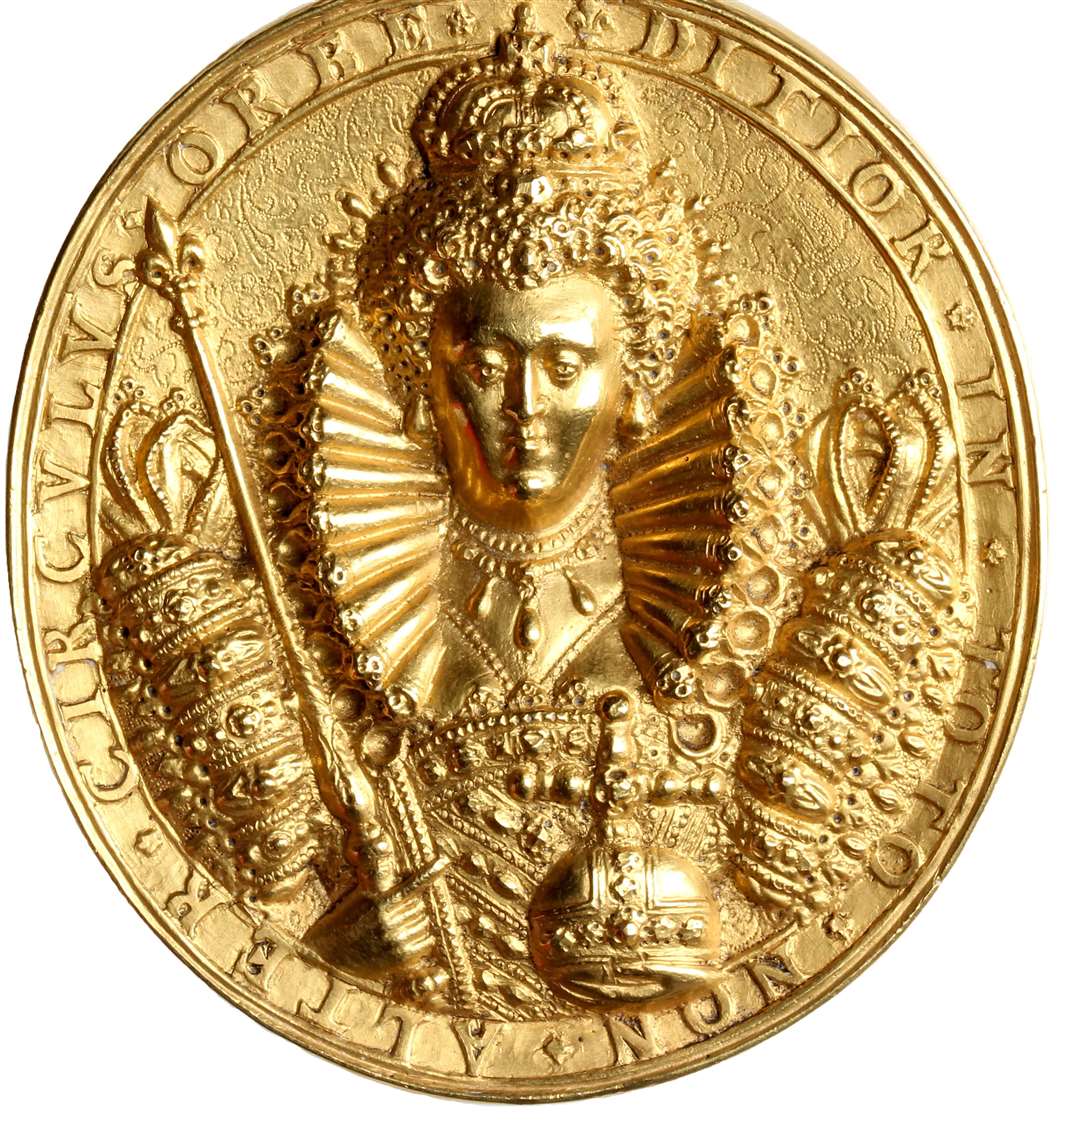 A gold medal showing Elizabeth I commemorating victory over the Spanish Armada